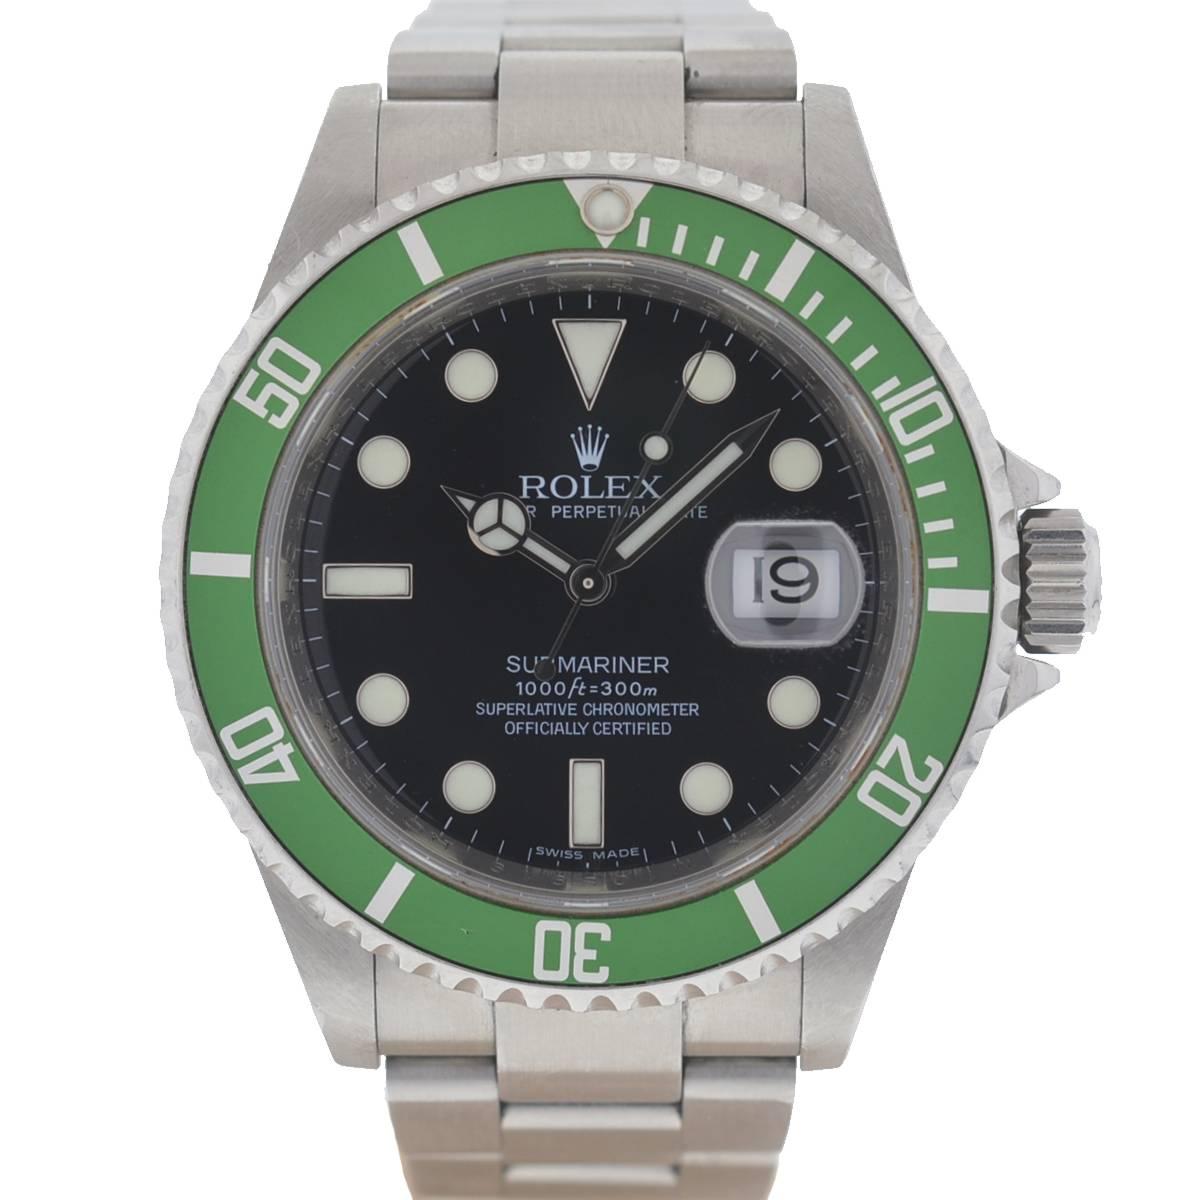 Company - Rolex
Model - 50th Anniversary Green Bezel Submariner
Case Metal - Stainless Steel
Case Measurement - 40mm
Bracelet - Stainless Steel
Dial - Black
Bezel - Green
Crystal - Scratch Resistant Sapphire
Movement - Automatic
Features - Date,